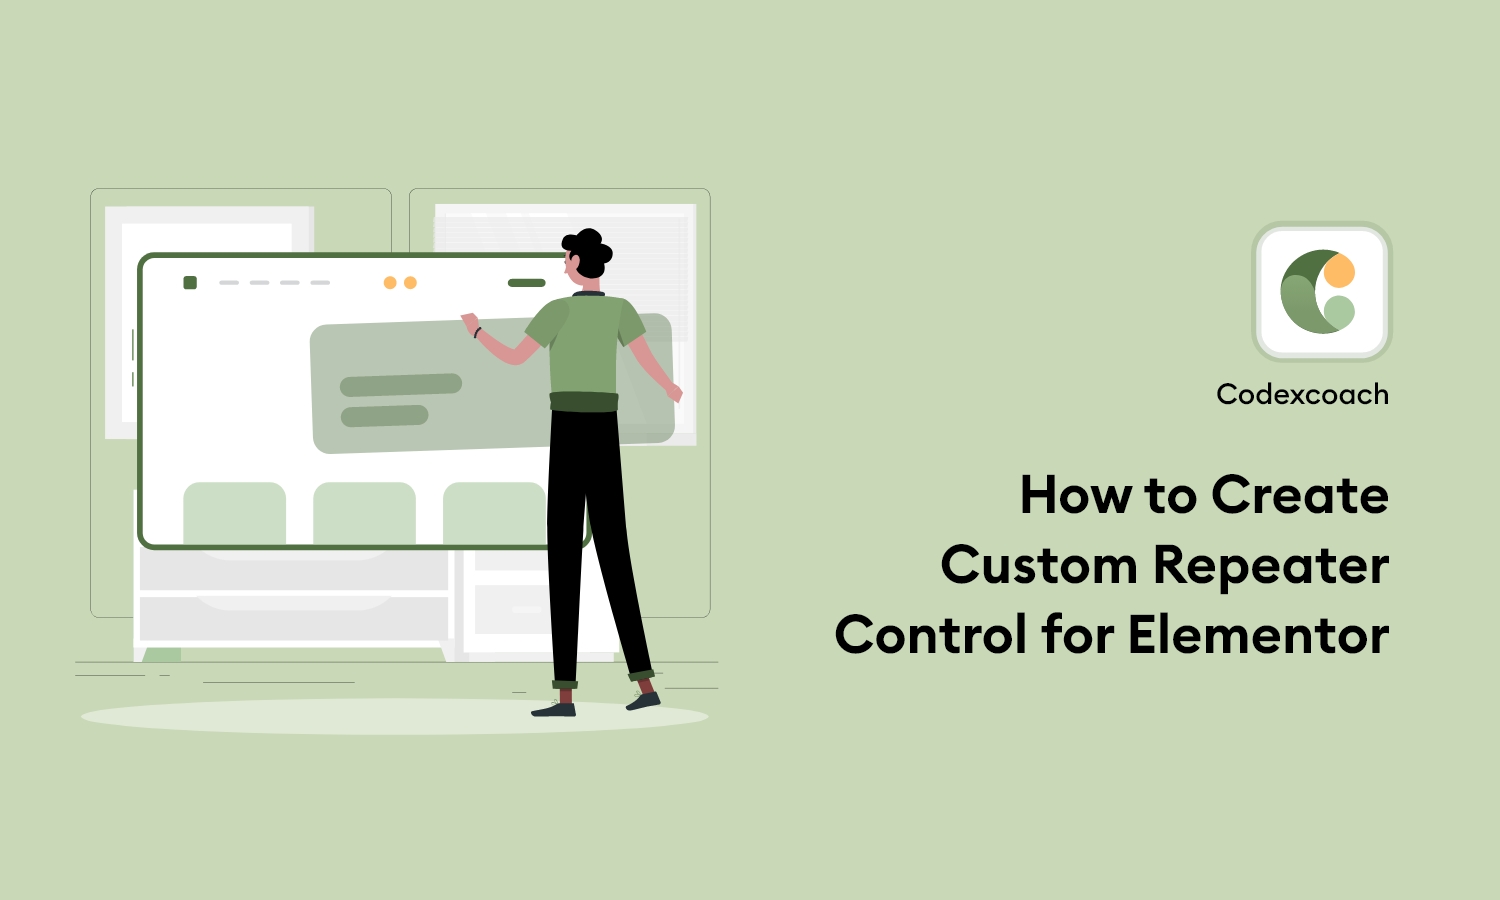 How to Create Custom Repeater Control for Elementor